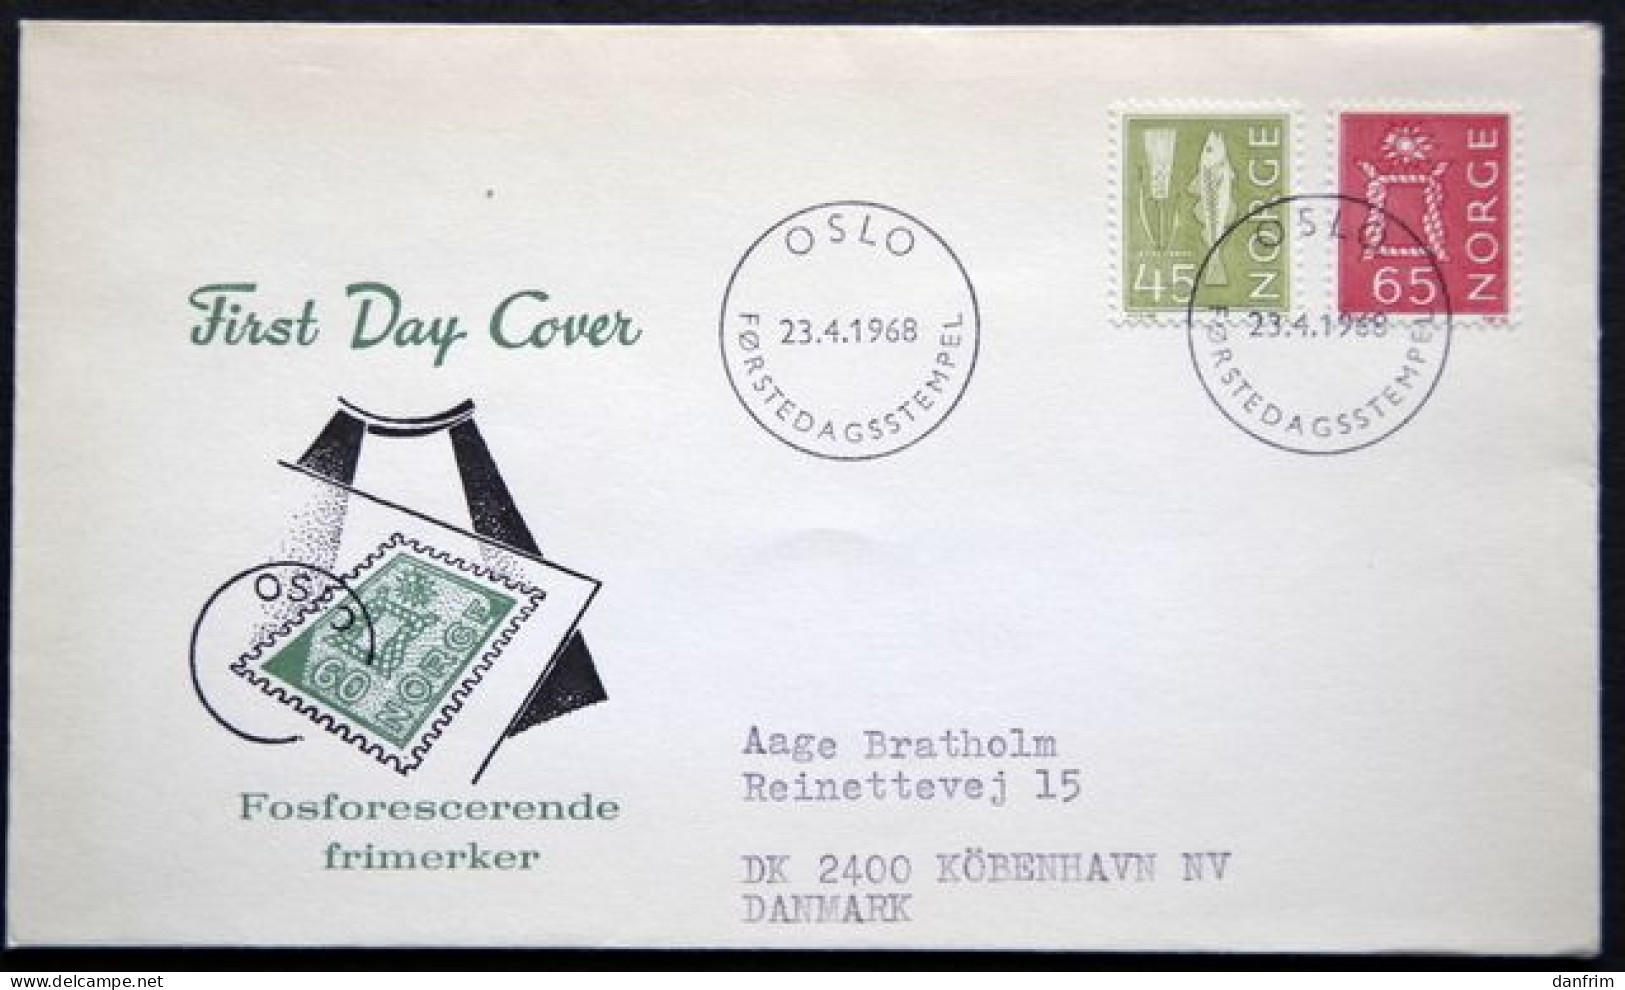 Norway 1968    MiNr.566-67  FDC  (lot 6072) - FDC